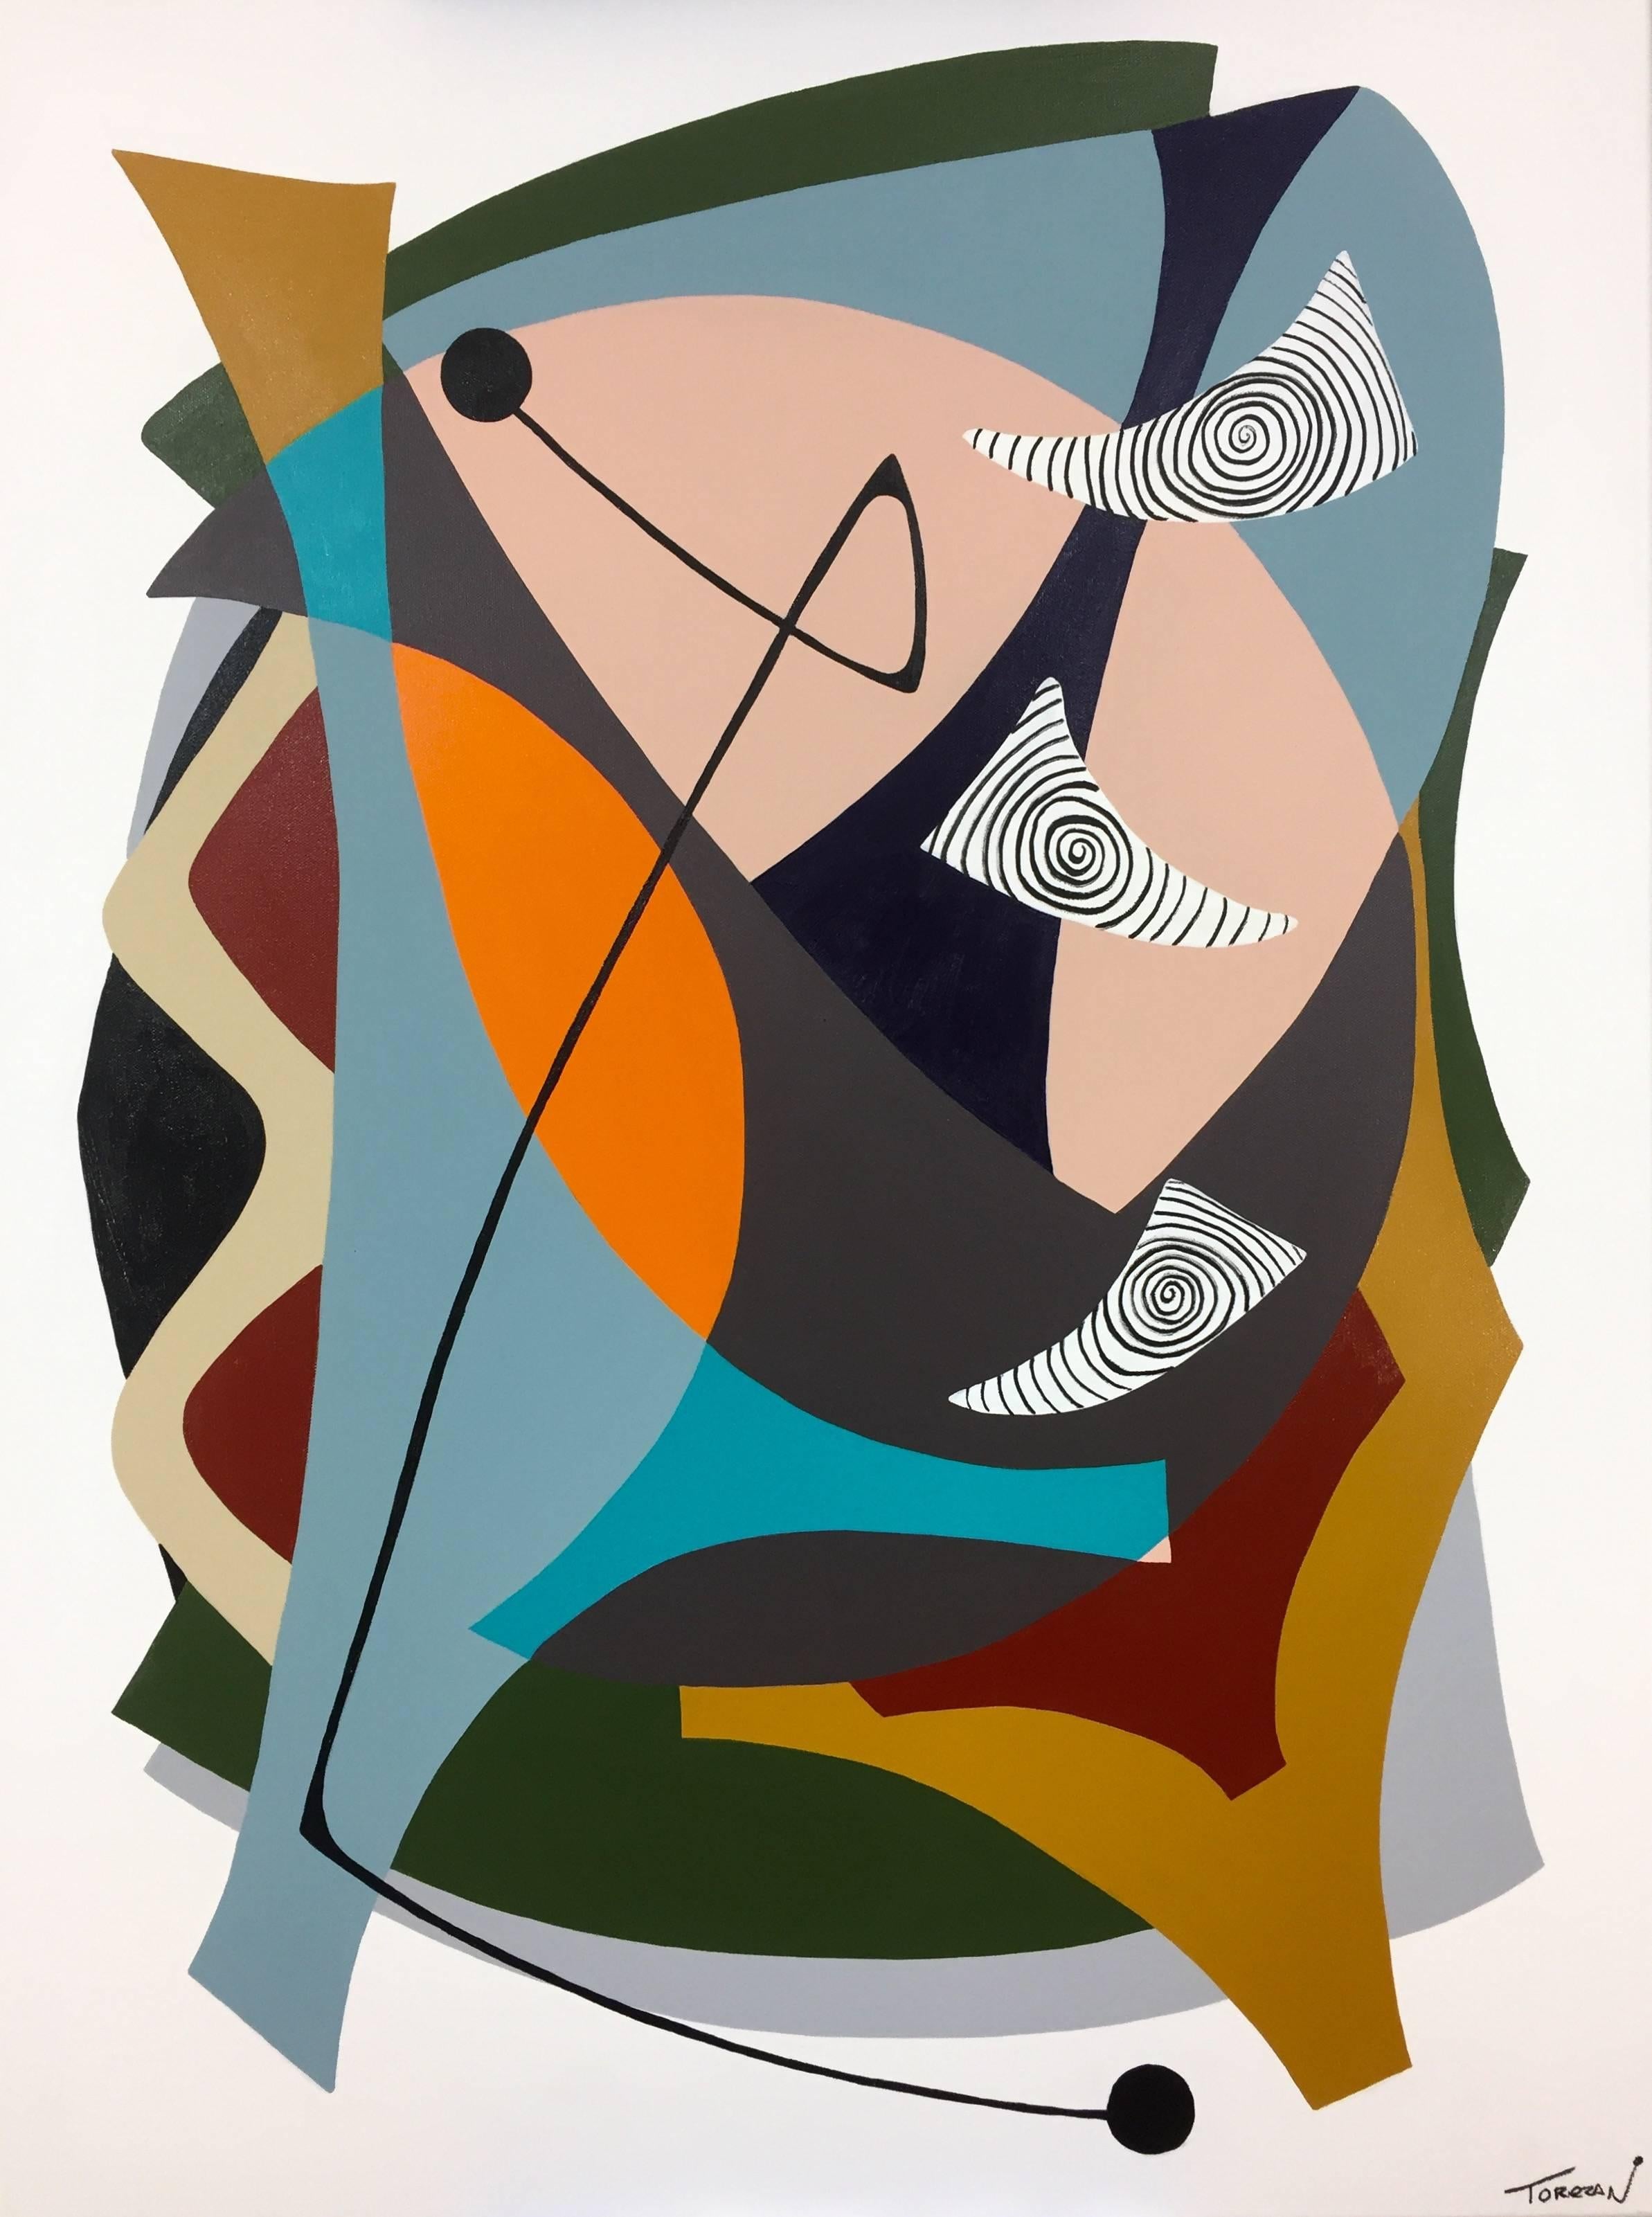 Amauri Torezan
Antenna II, 2017
Acrylic paint on canvas 
48" x 48"
  
  Amauri Torezan is a contemporary artist living in South Florida in the United States. Inspired by modernist abstractions and the modern lifestyle in the Mid-20th century, the